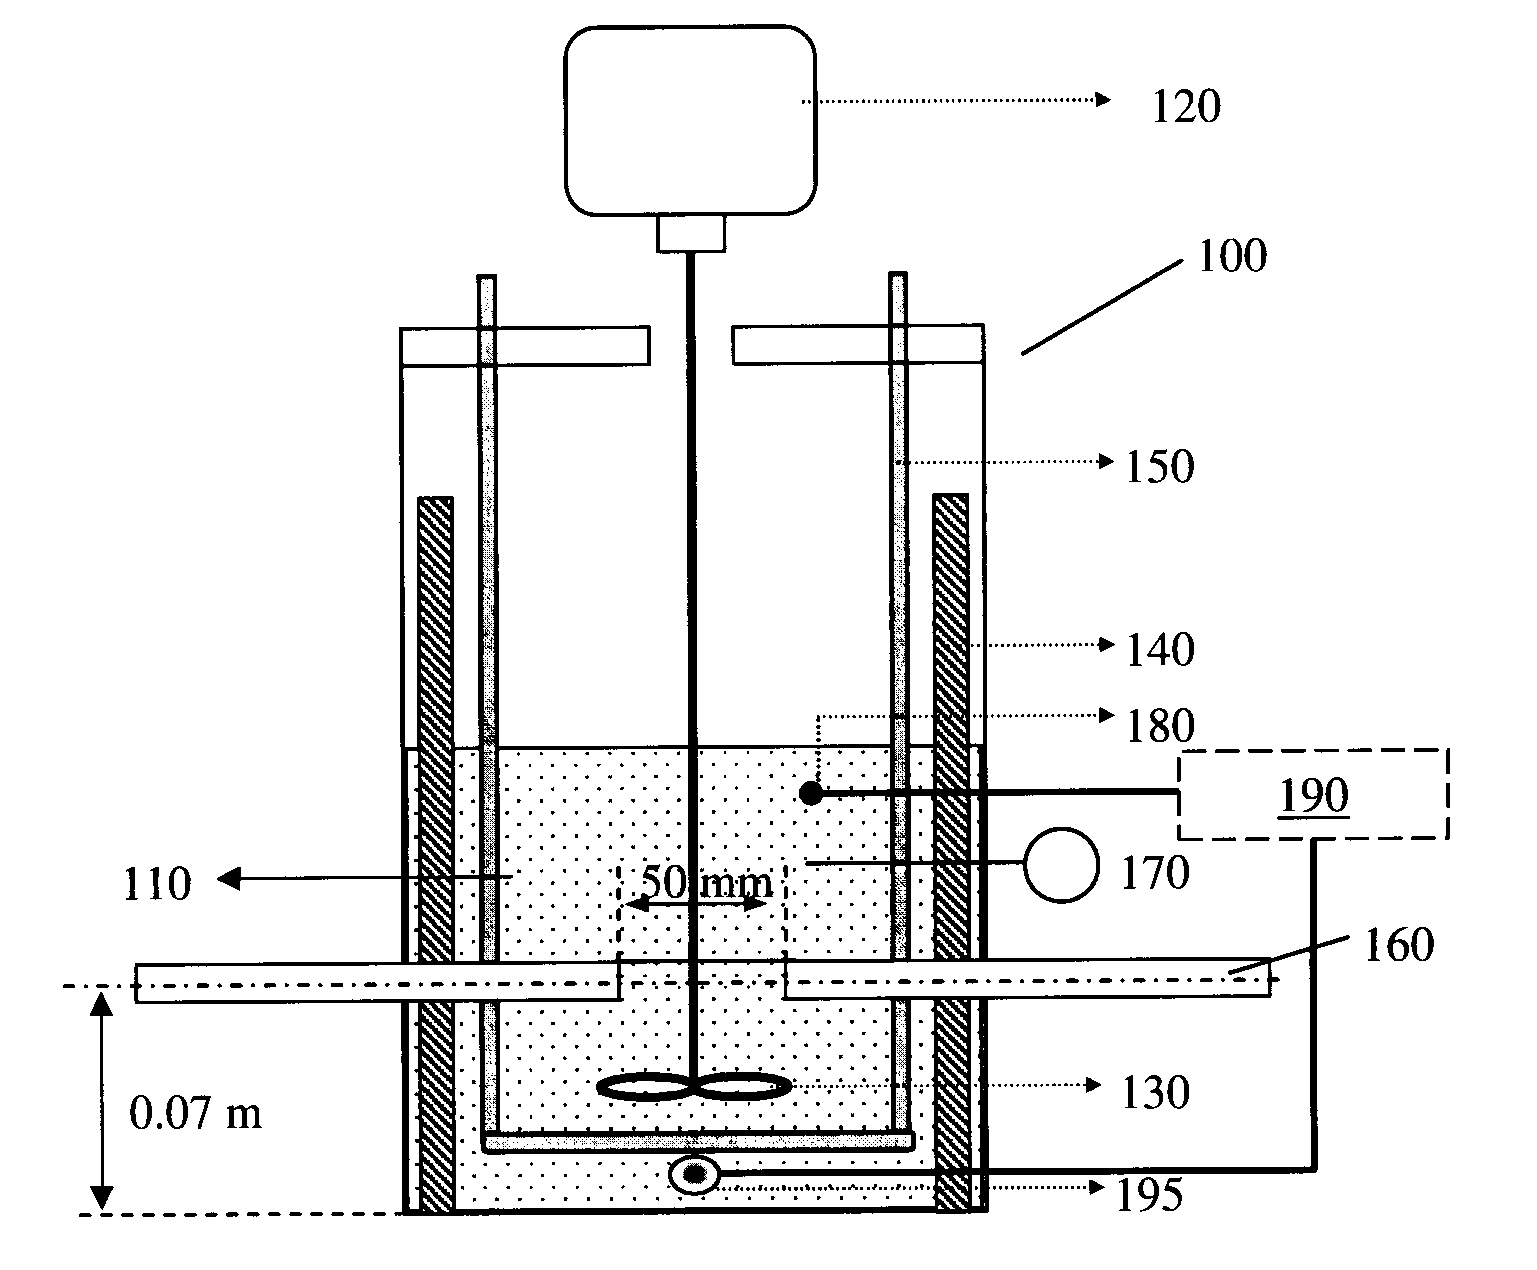 Ultrasonic method of monitoring particle size distribution of a medium